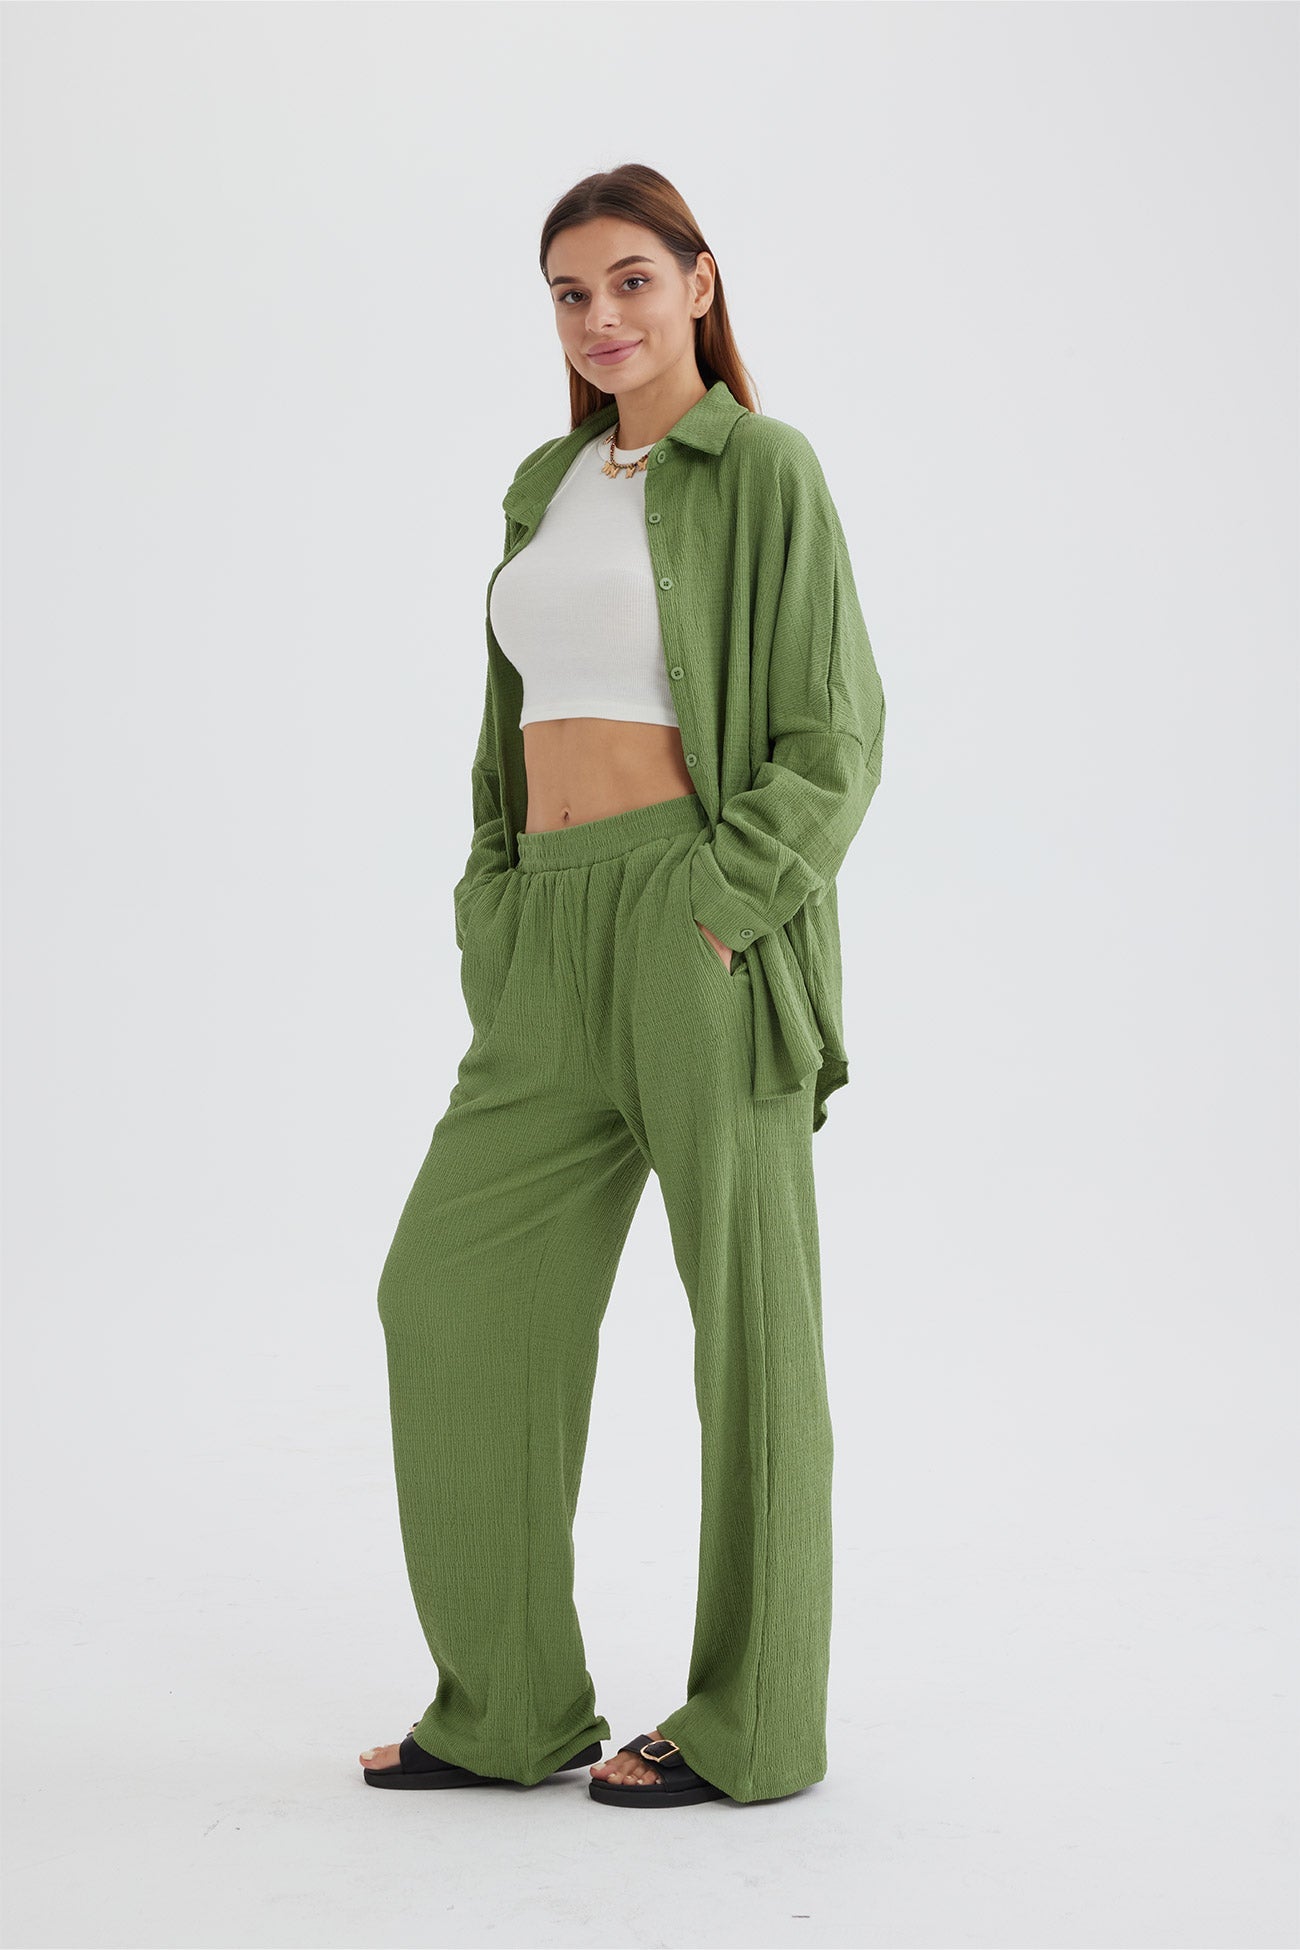 Two Piece Solid Color Long Sleeve Shirt Long Pants Set